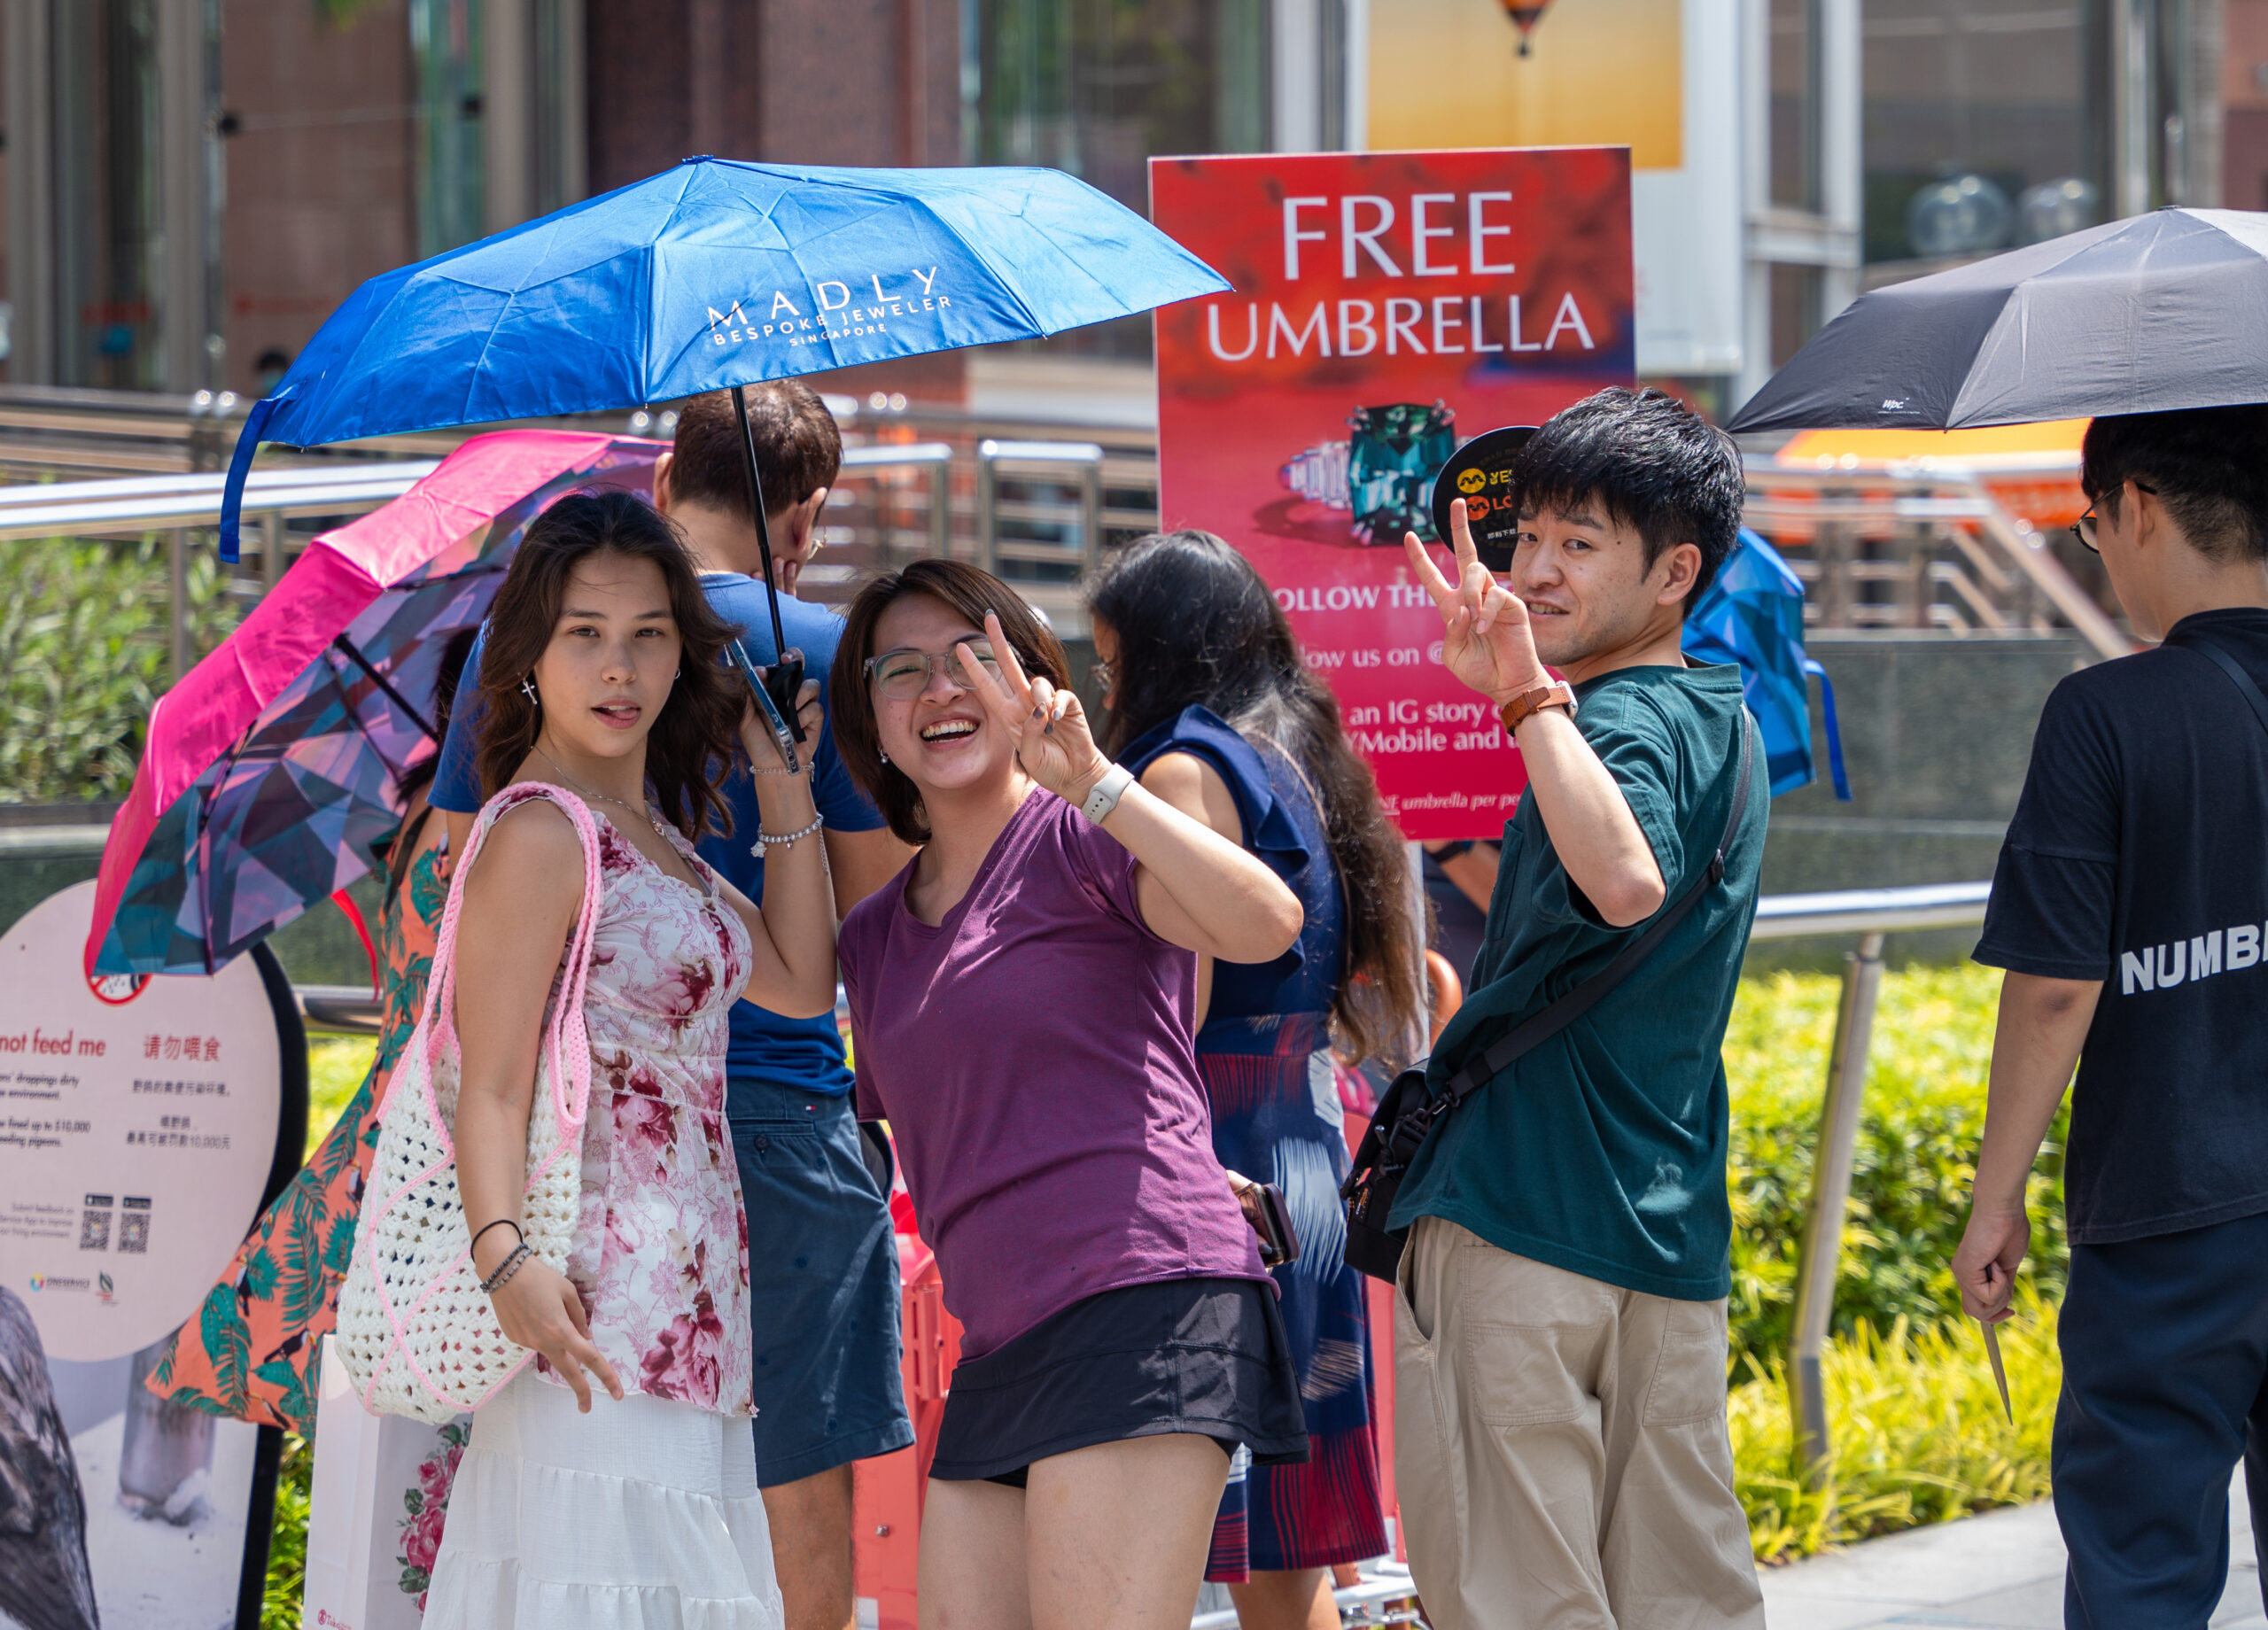 Eurasian and Asian girl under a blue umbrella, next to a Japanese man, making the peace sign with a bicycle cart in the background along Orchard Road